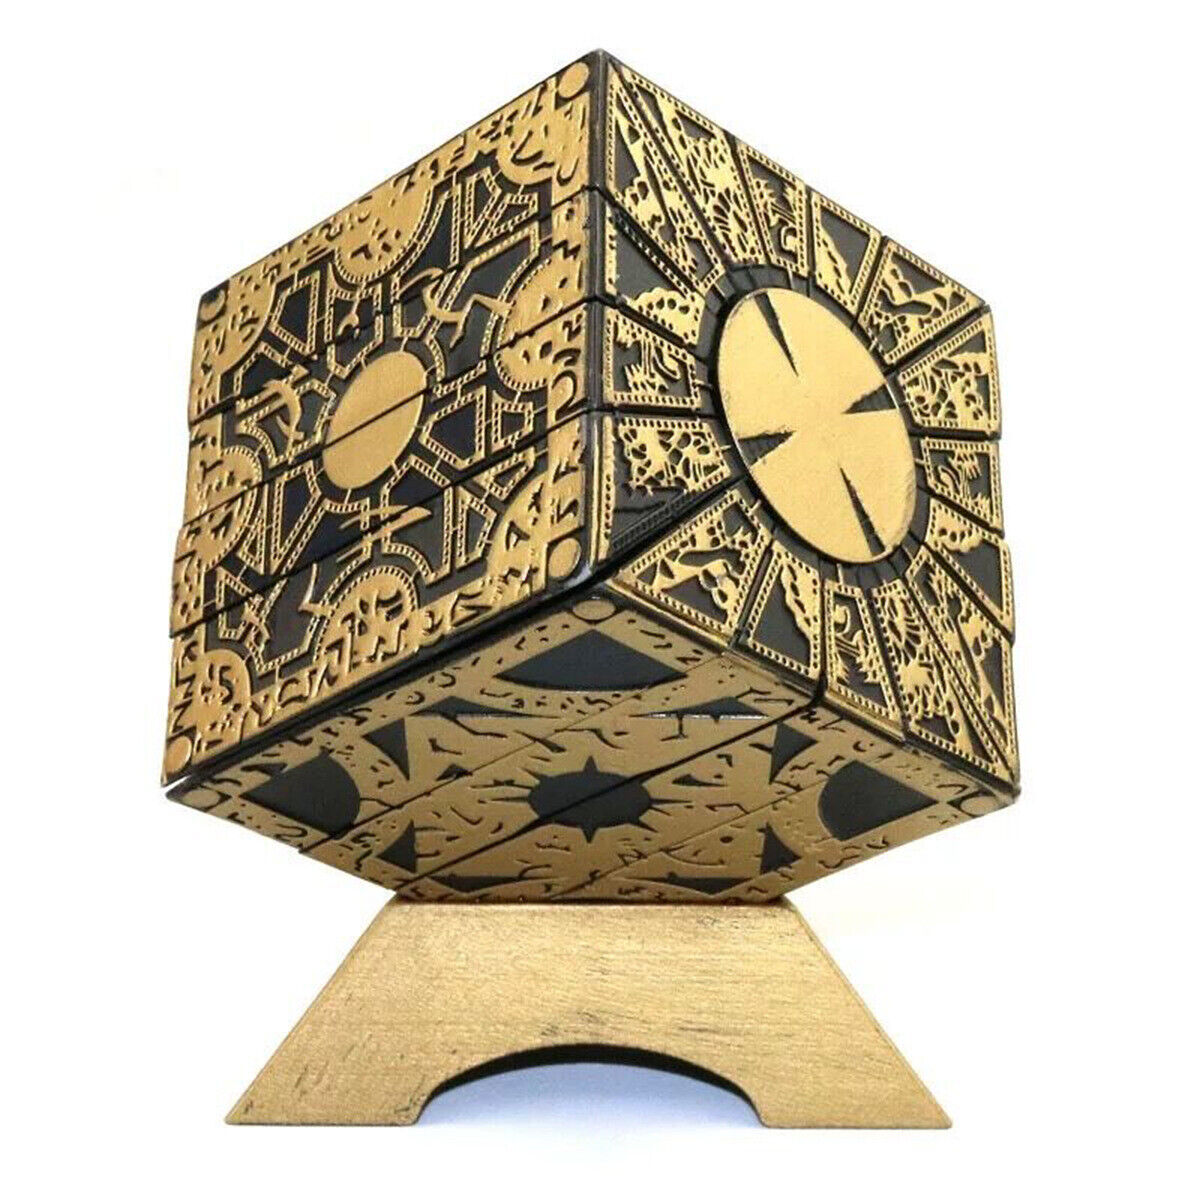 New Hellraiser Cube Puzzle Box Lament Configuration Functional Pinhead Prop Gift